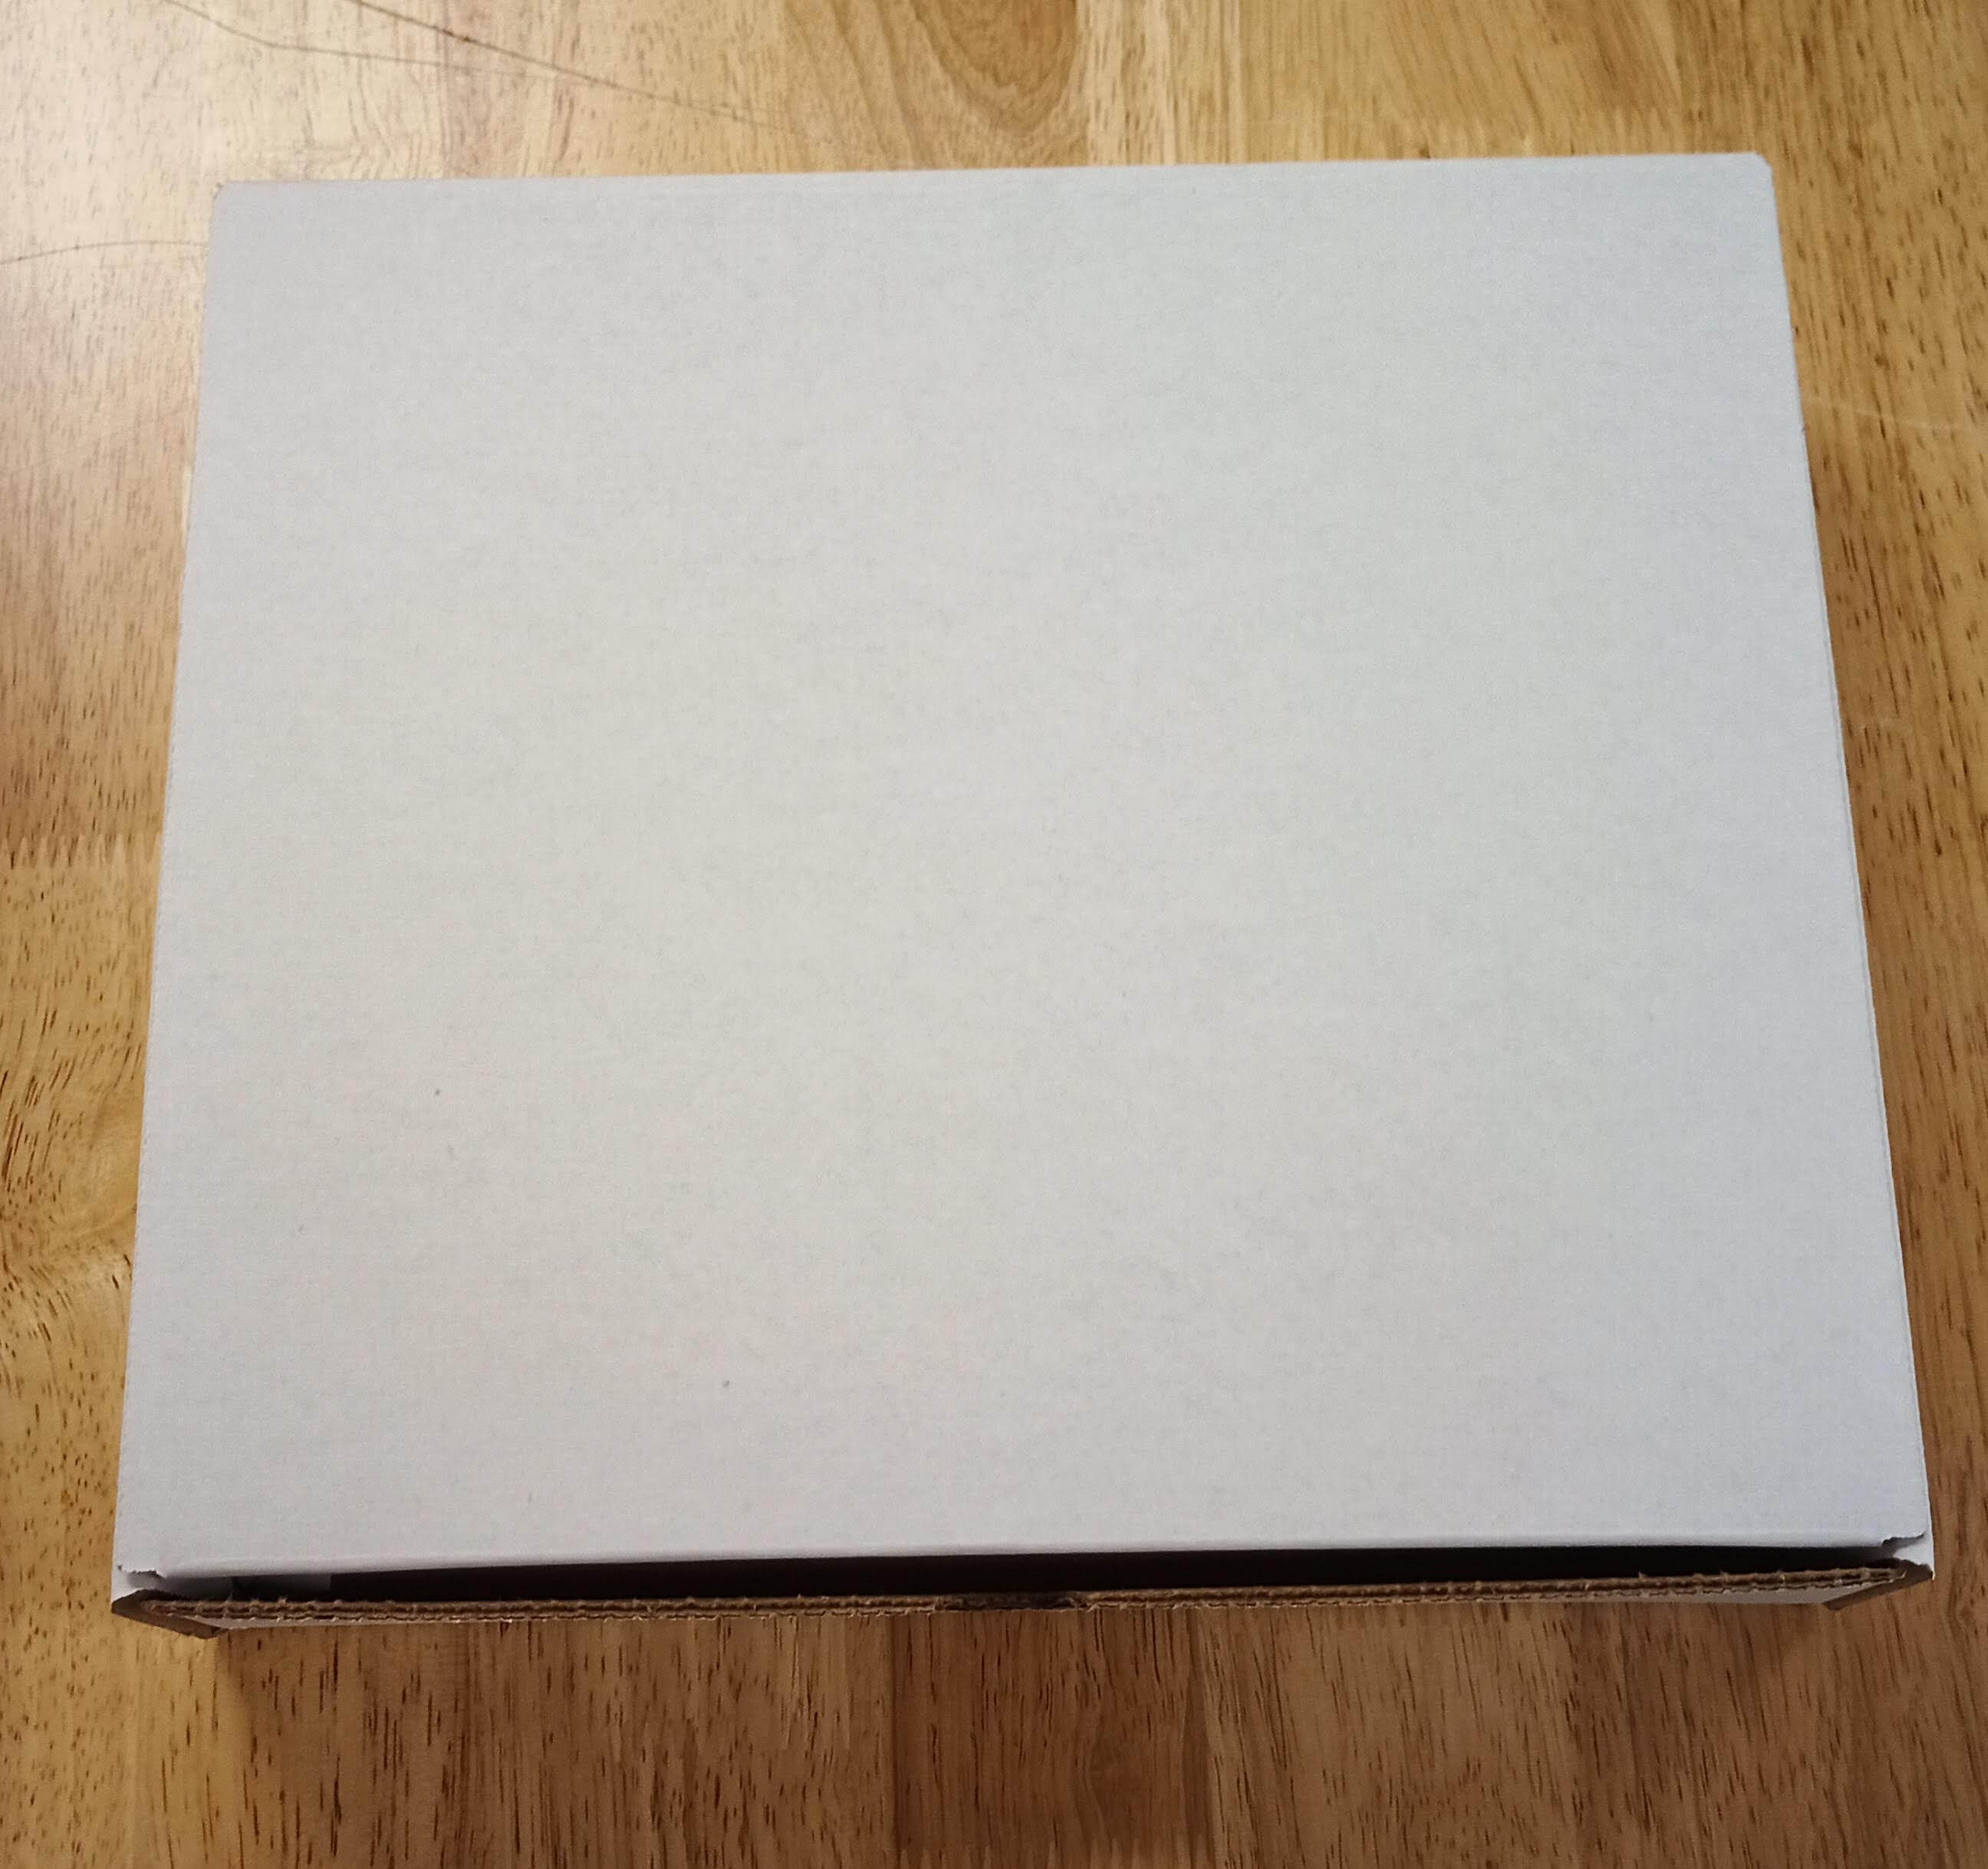 The box that my game comes shipped in.